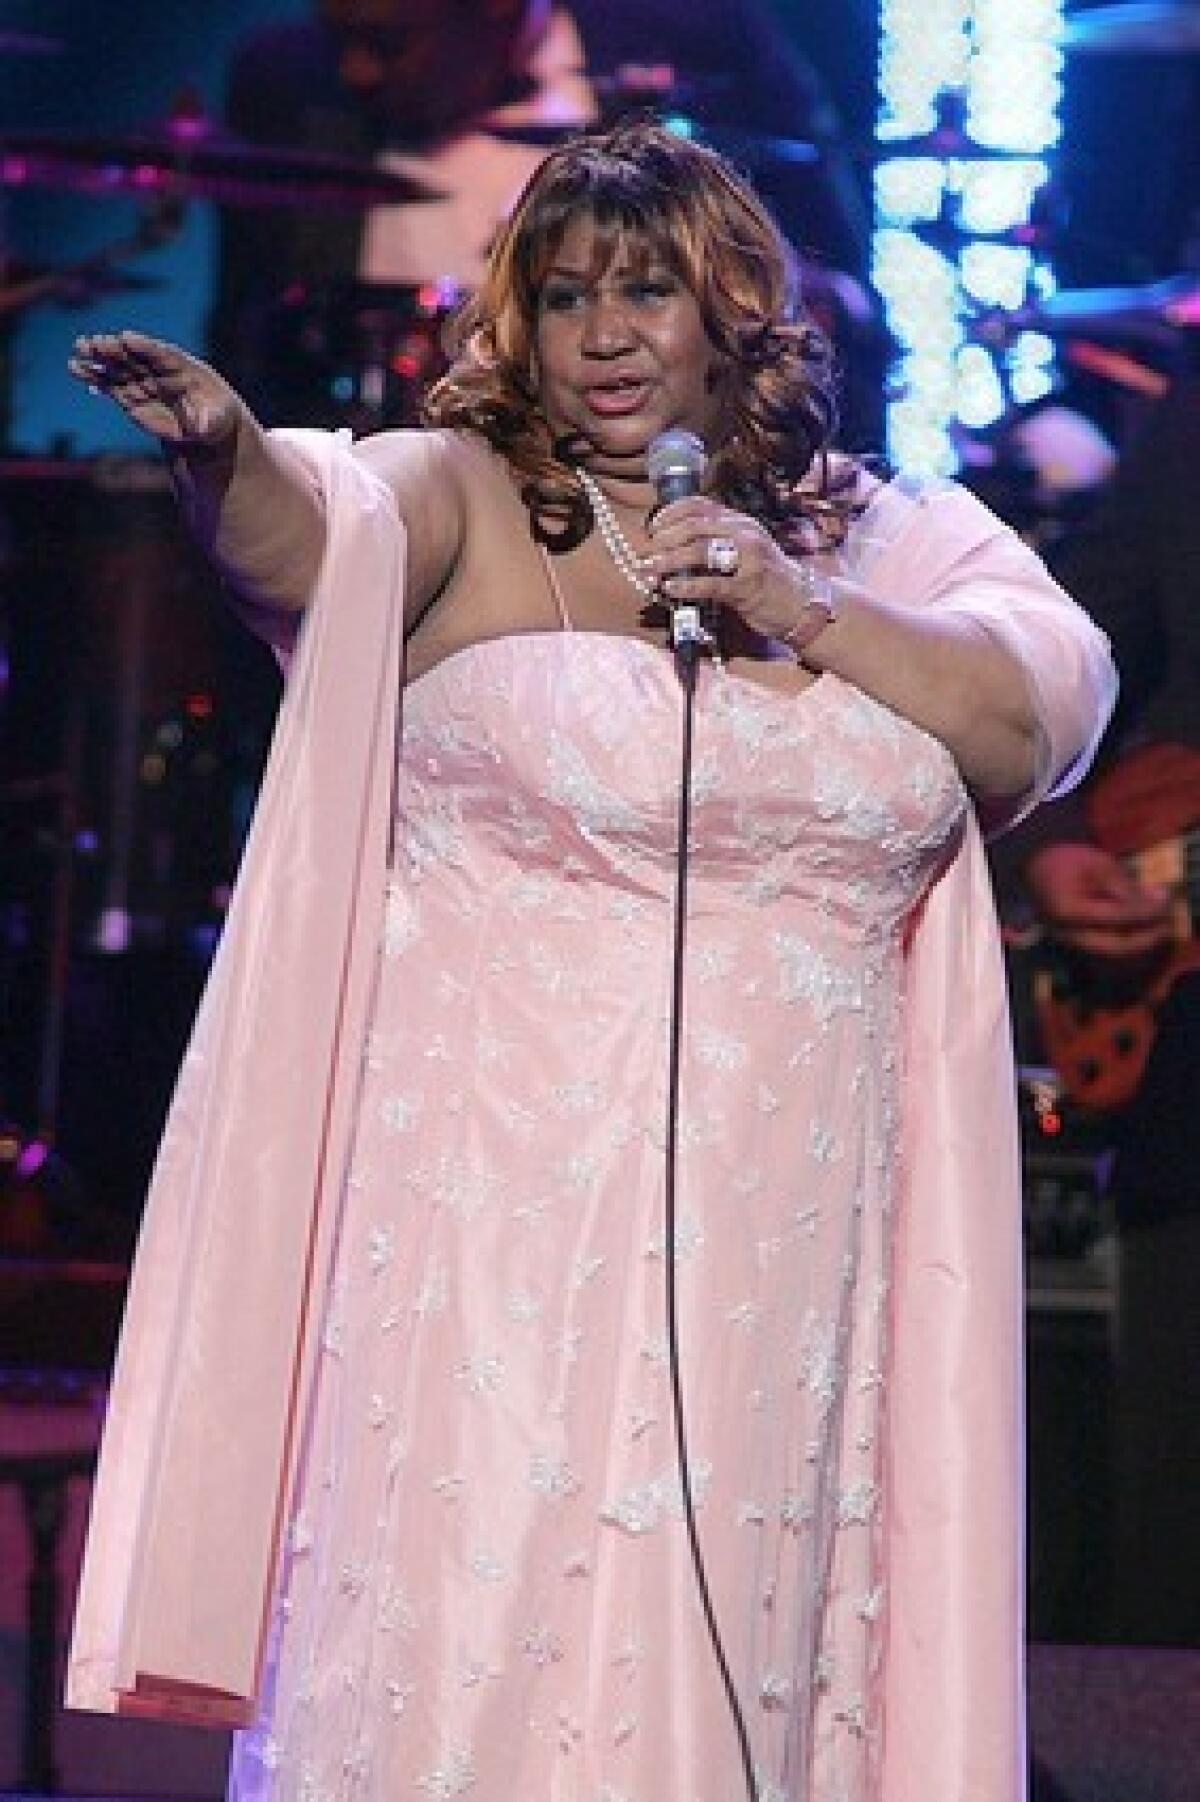 Aretha Franklin performs onstage at the Dream Concert presented by Viacom at Radio City Music Hall on September 18, 2007, in New York City.